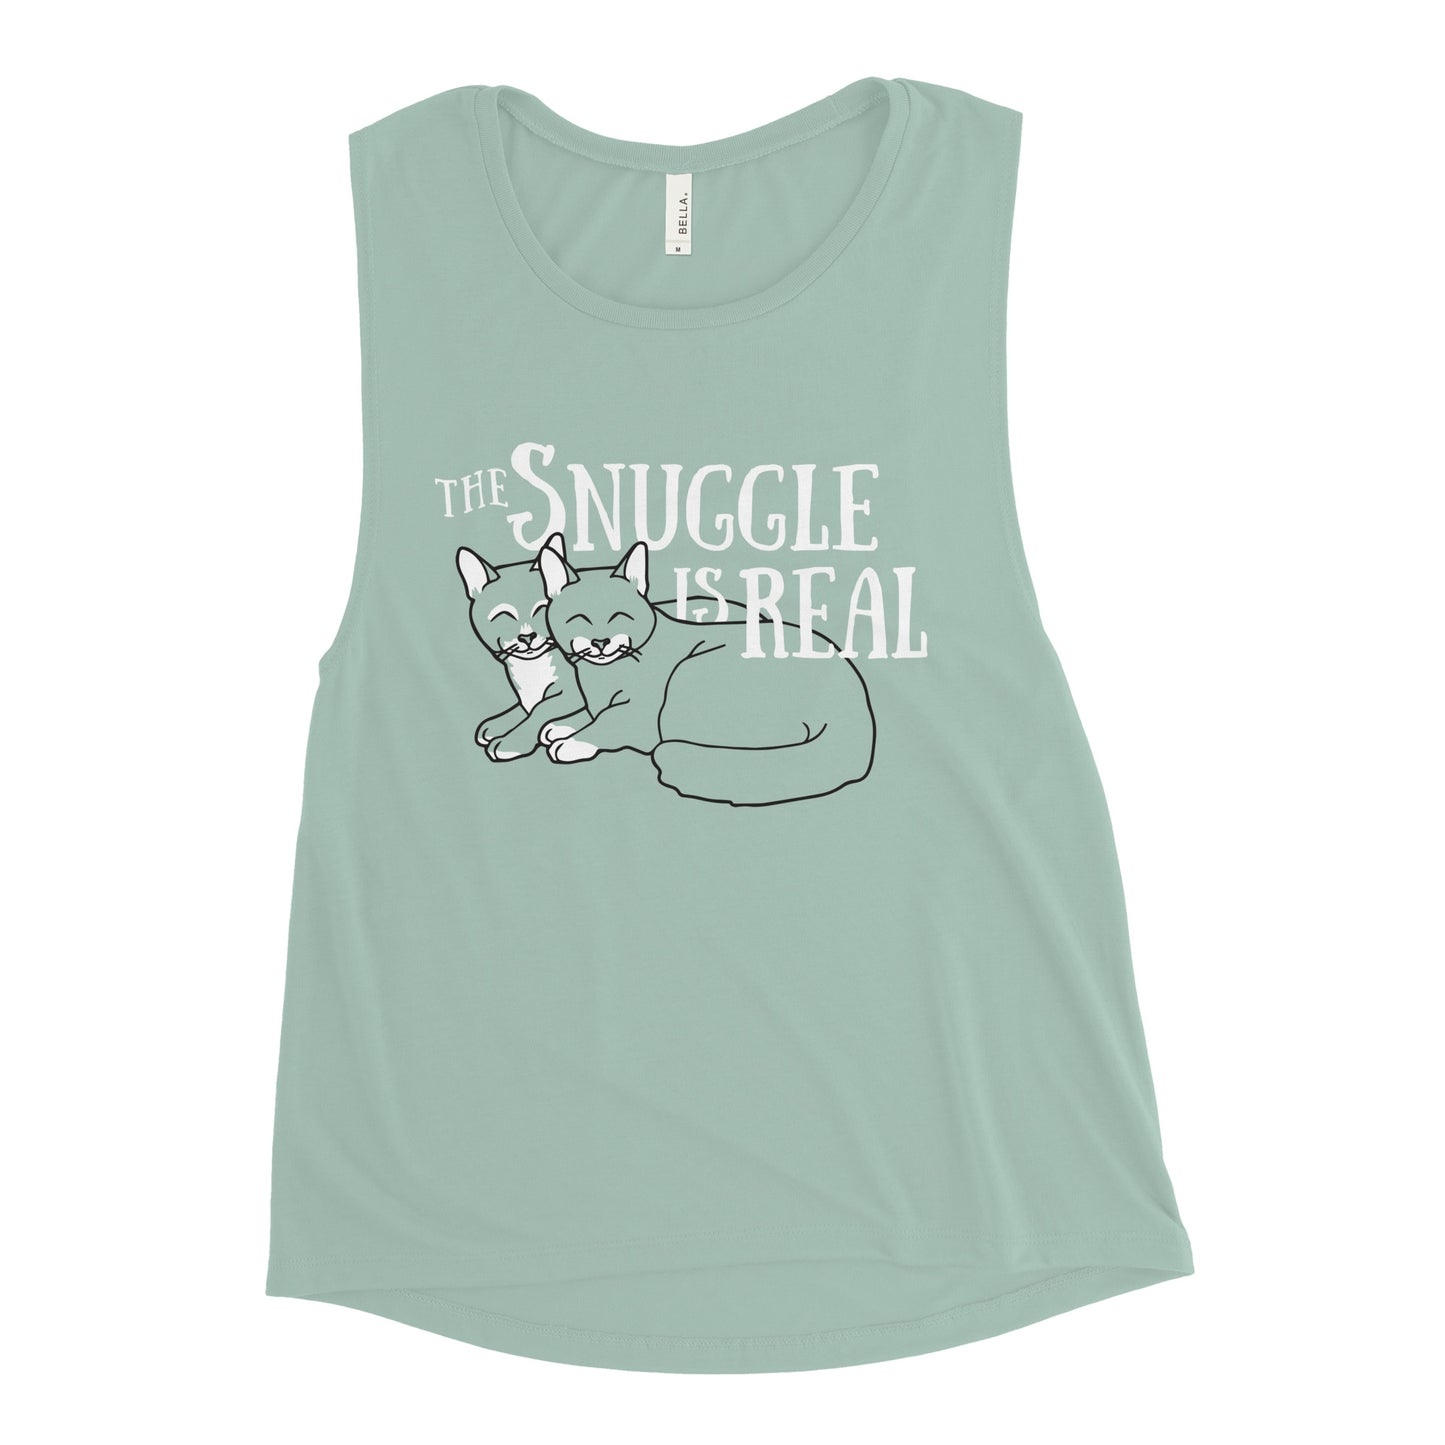 The Snuggle Is Real Women's Muscle Tank